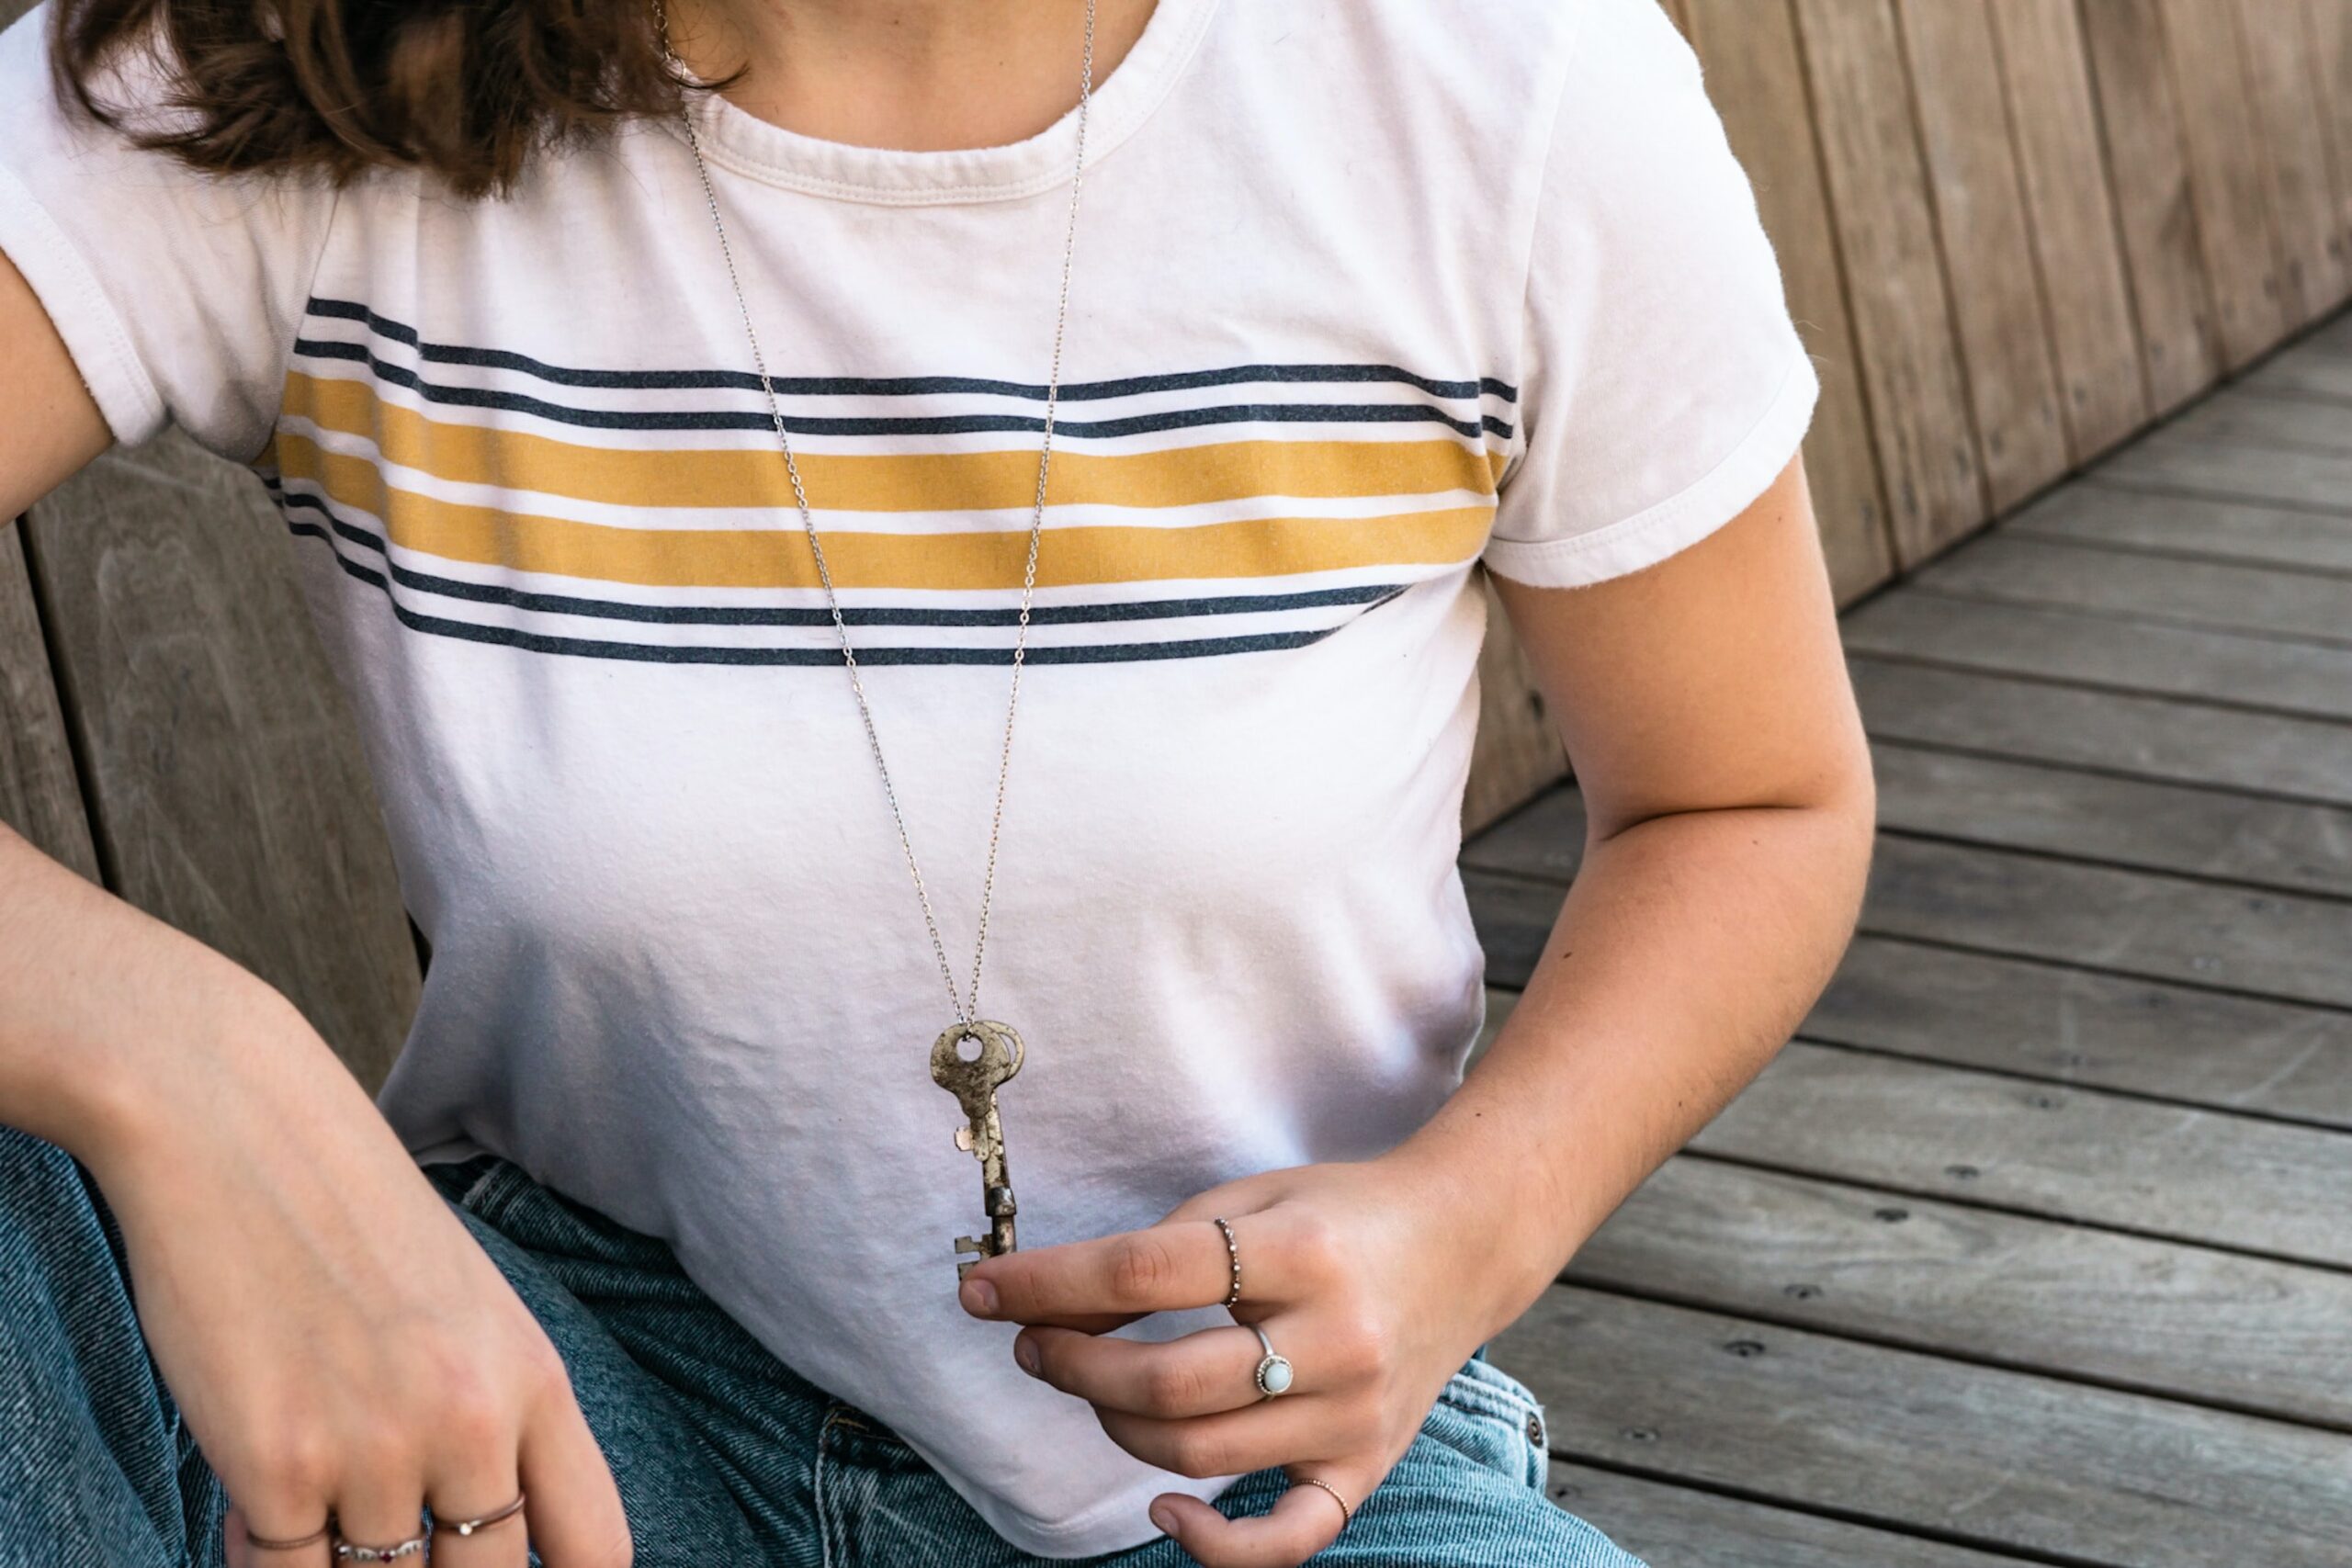 close up of white woman wearing white t-shirt with a few colorful horizontal stripes. she's wearing a necklace with a key hanging on it, and she's holding the key with two fingers. she has rings on her pointer and middle fingers.